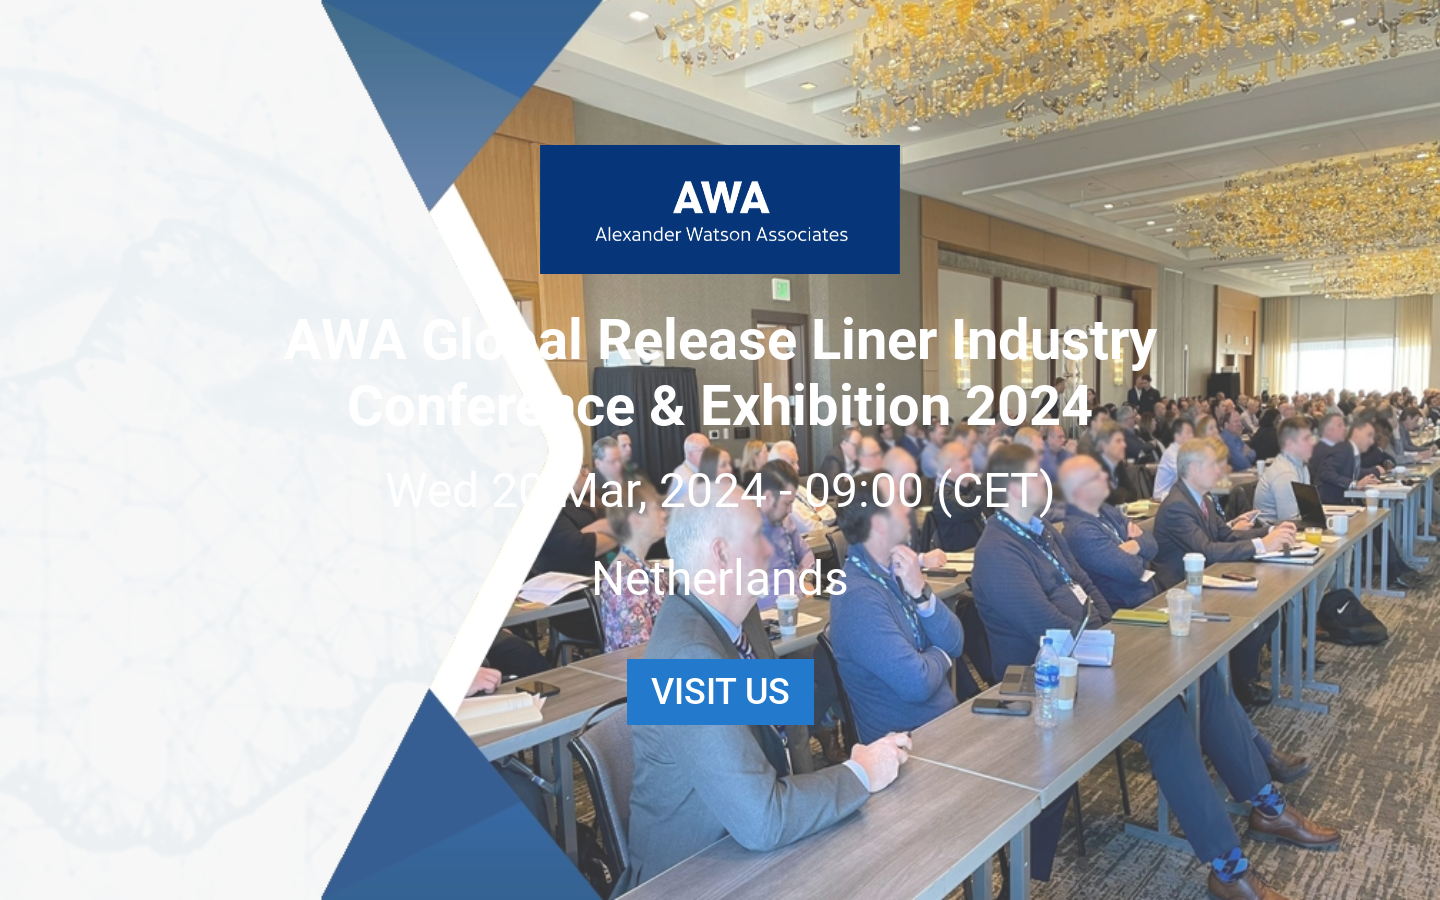 AWA Global Release Liner Industry Conference & Exhibition 2024